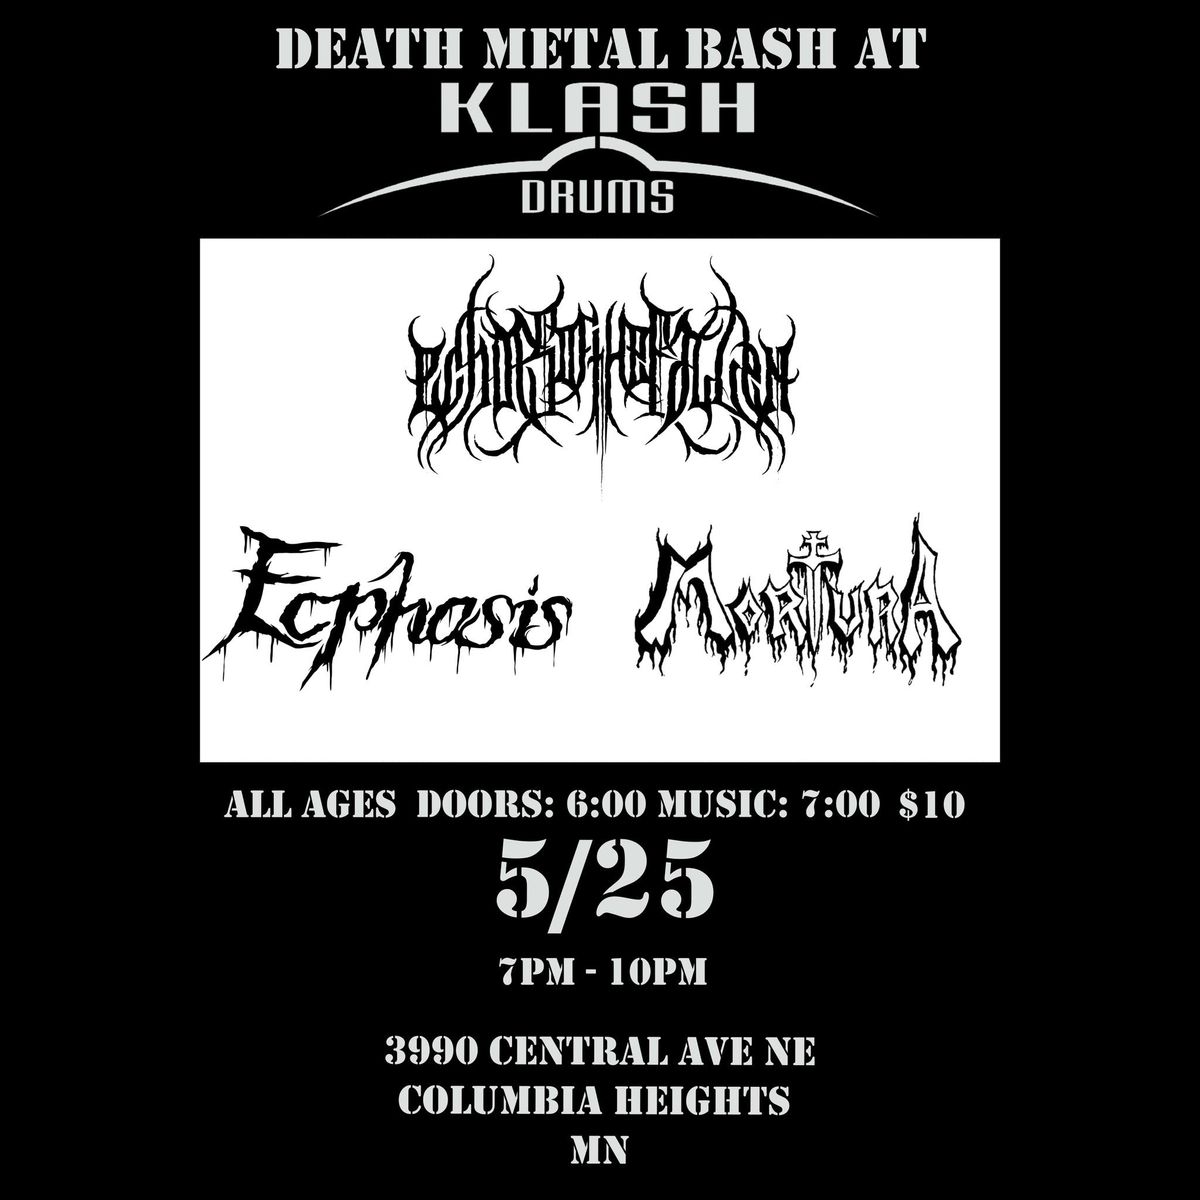 Echoes of the Fallen w\/ Mortura & Ecphasis